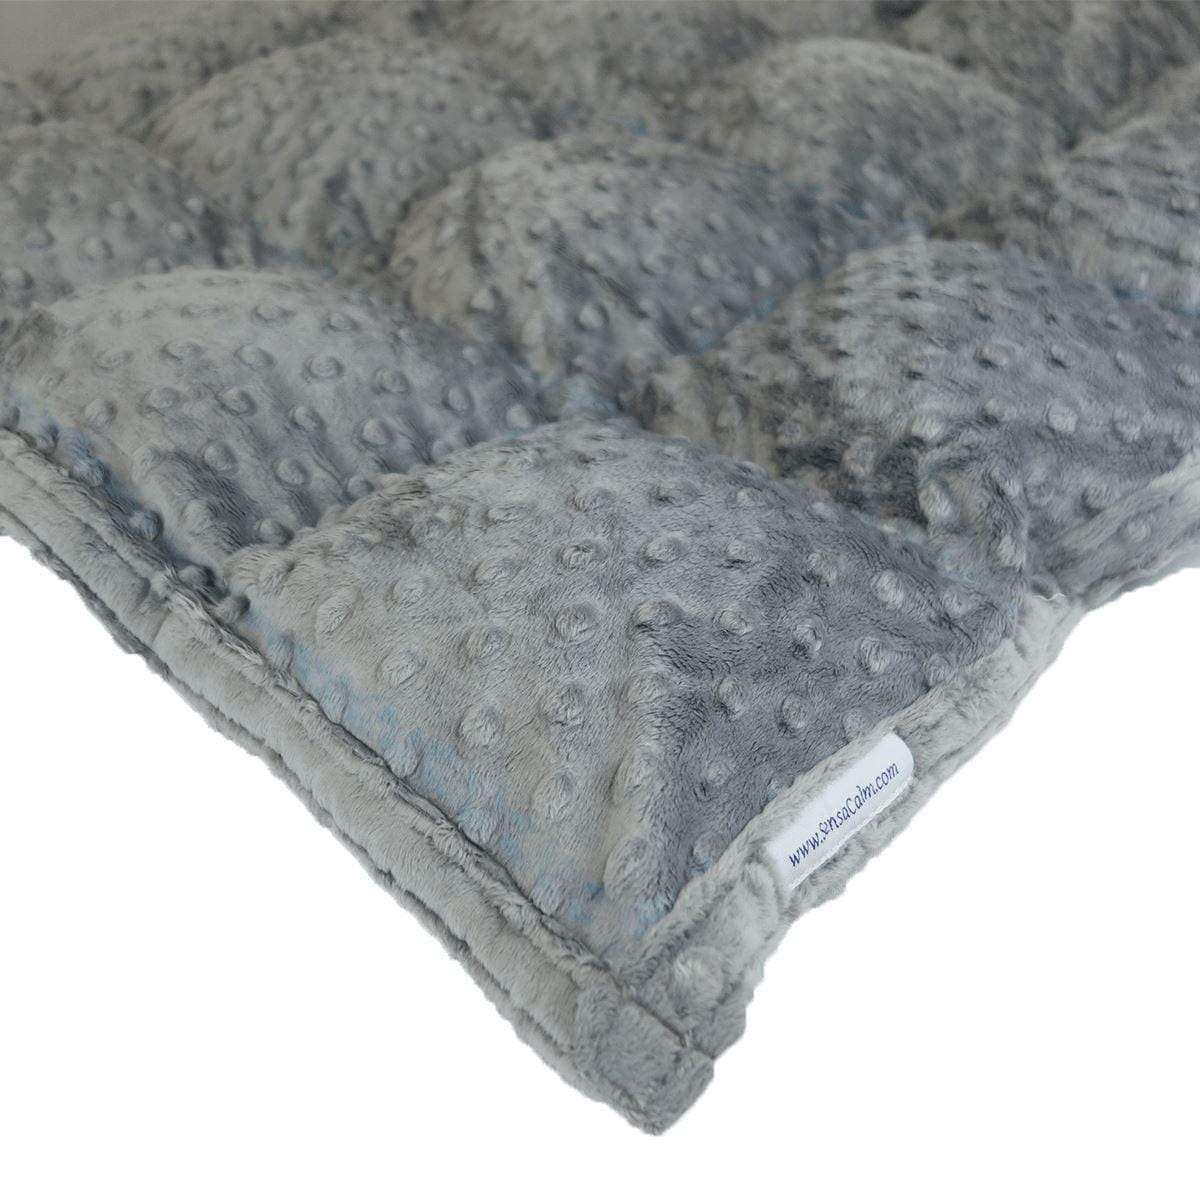 Clearance Weighted Blanket - Large 18 lb Dimple Graphite (for 150+ lb user)